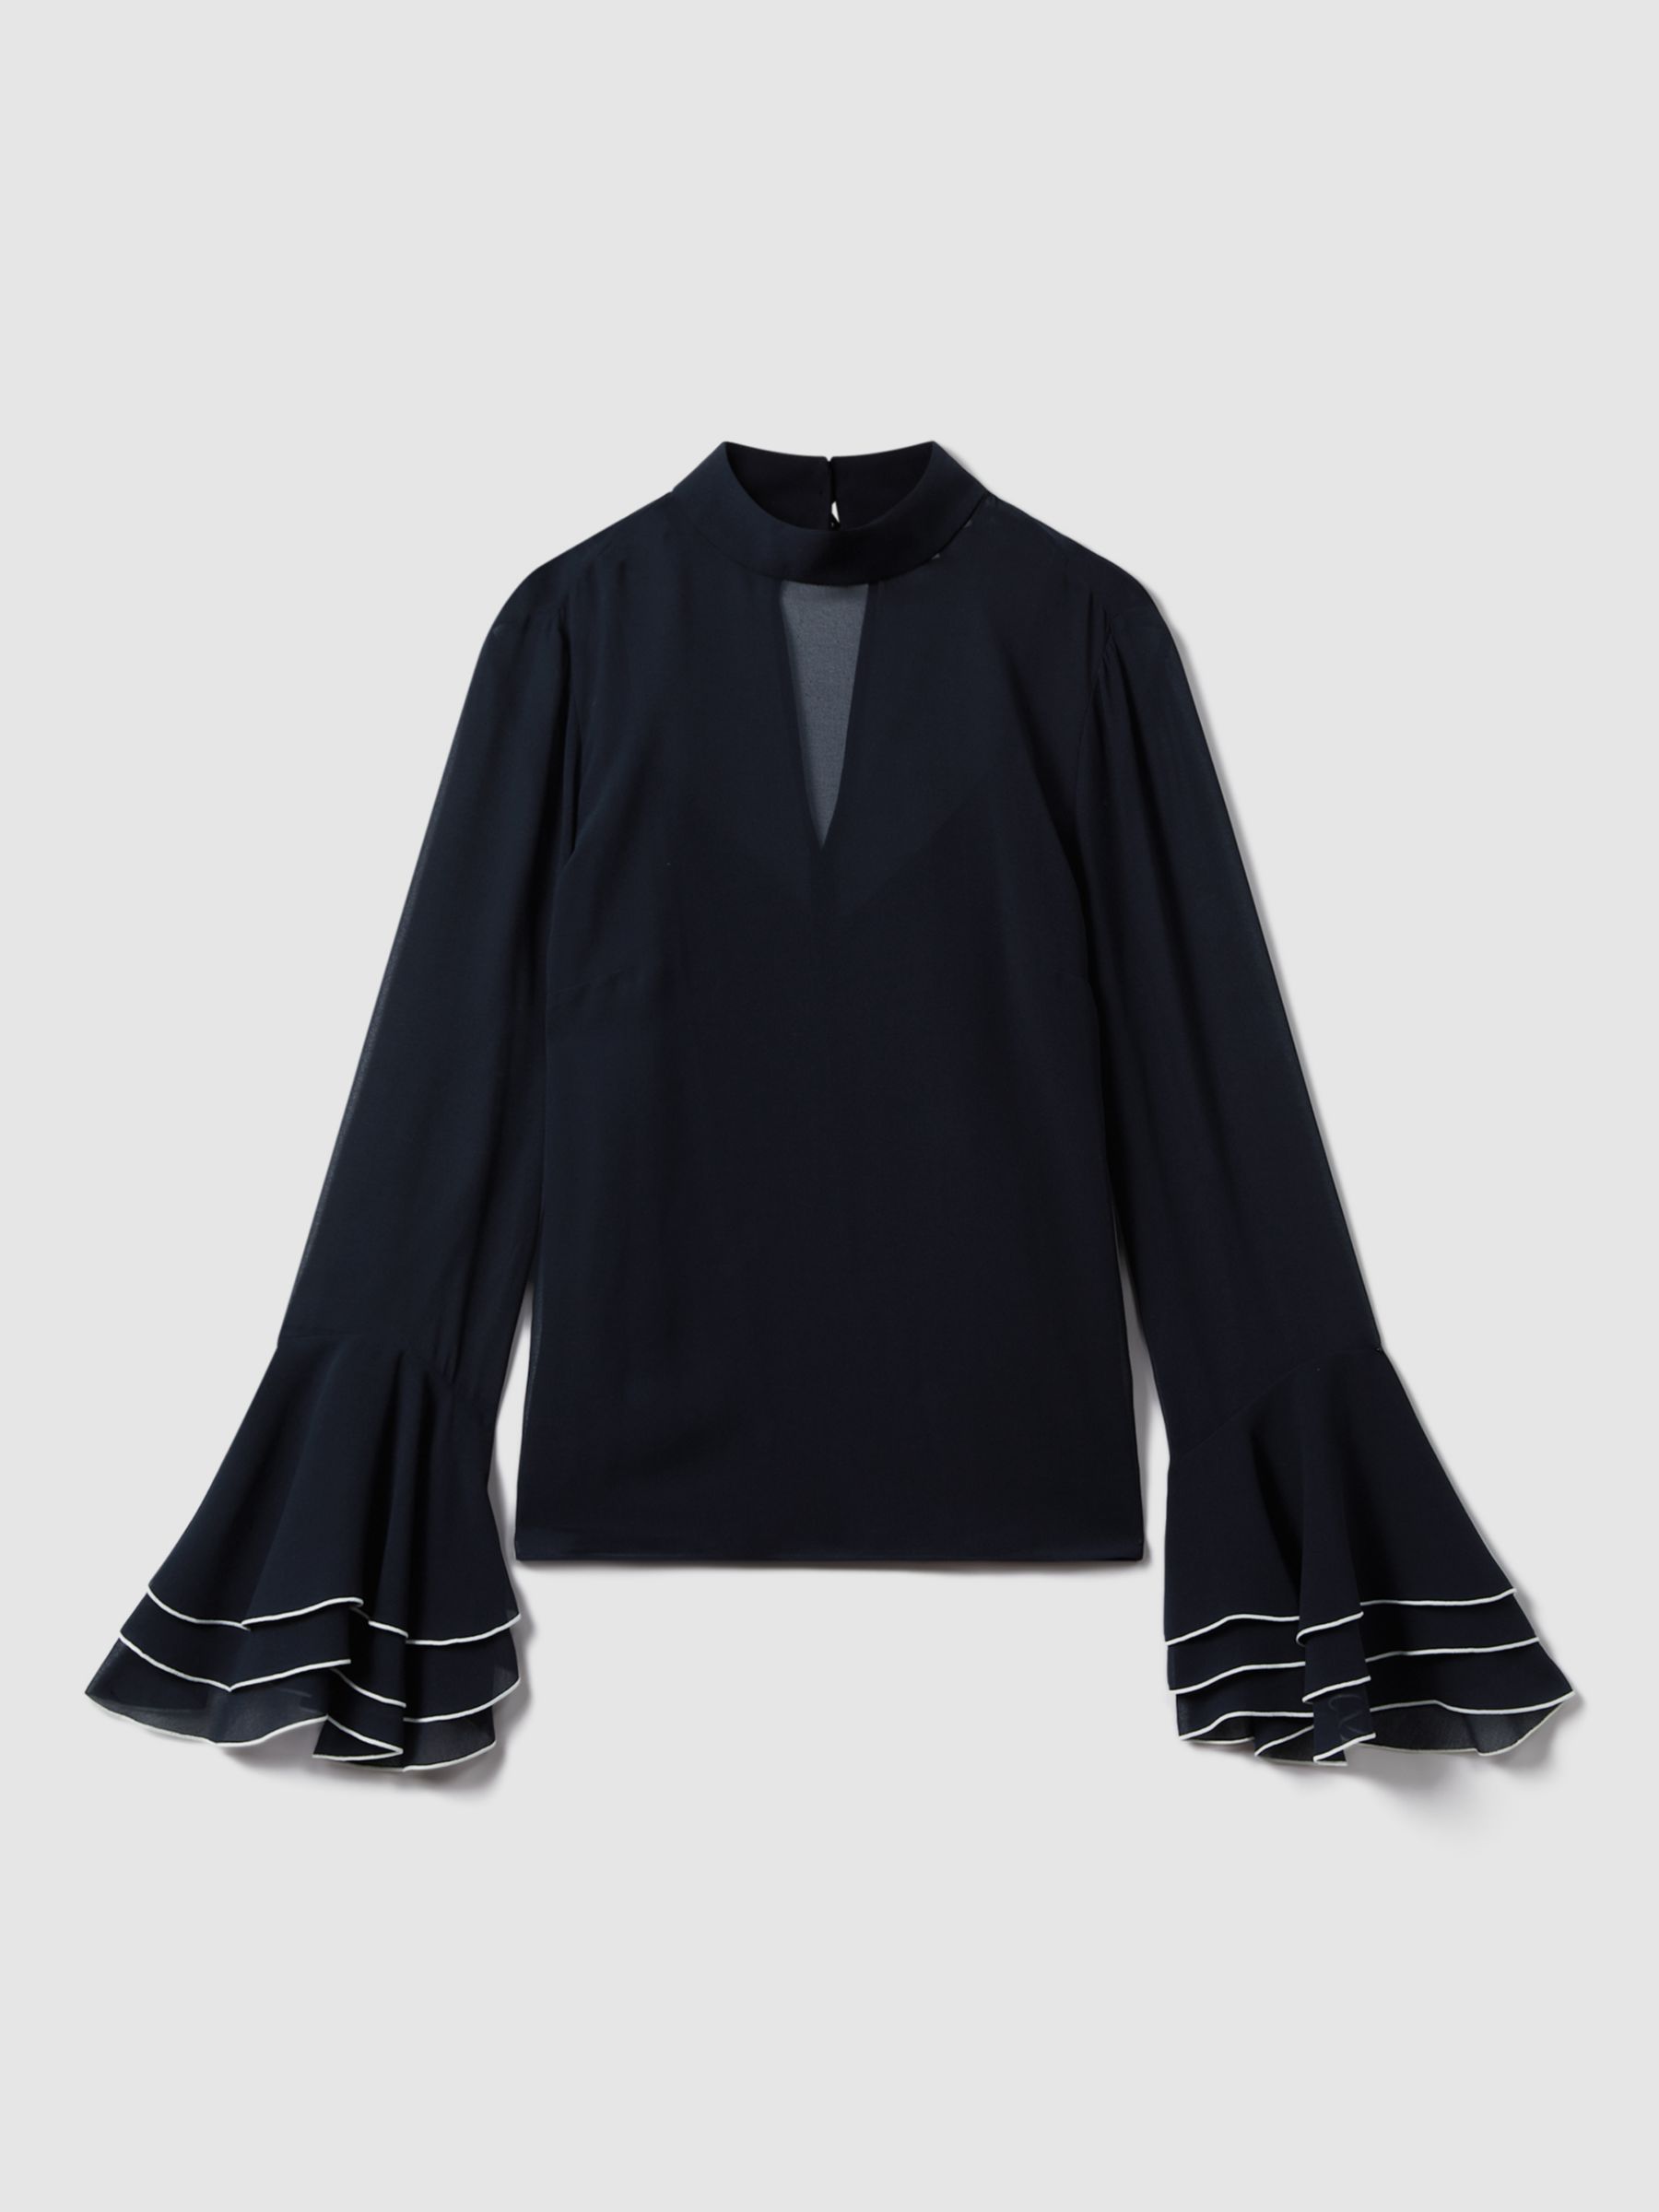 Buy FLORERE High Neck Contrast Trim Fluted Cuff Blouse, Navy Online at johnlewis.com